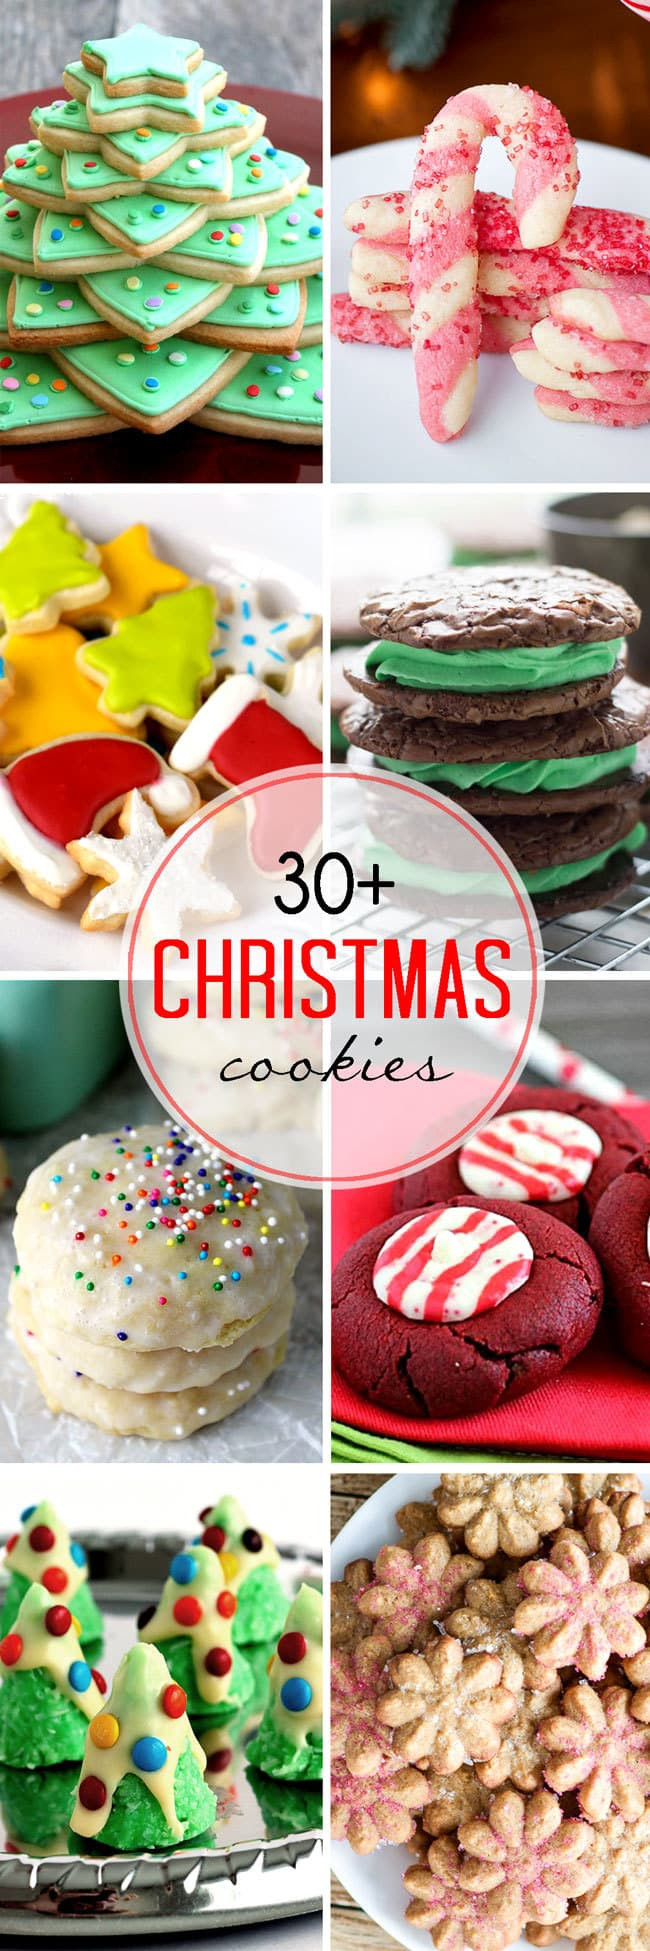 Favorite Christmas Cookies
 Over 30 of the Best Christmas Cookies from Your Favorite